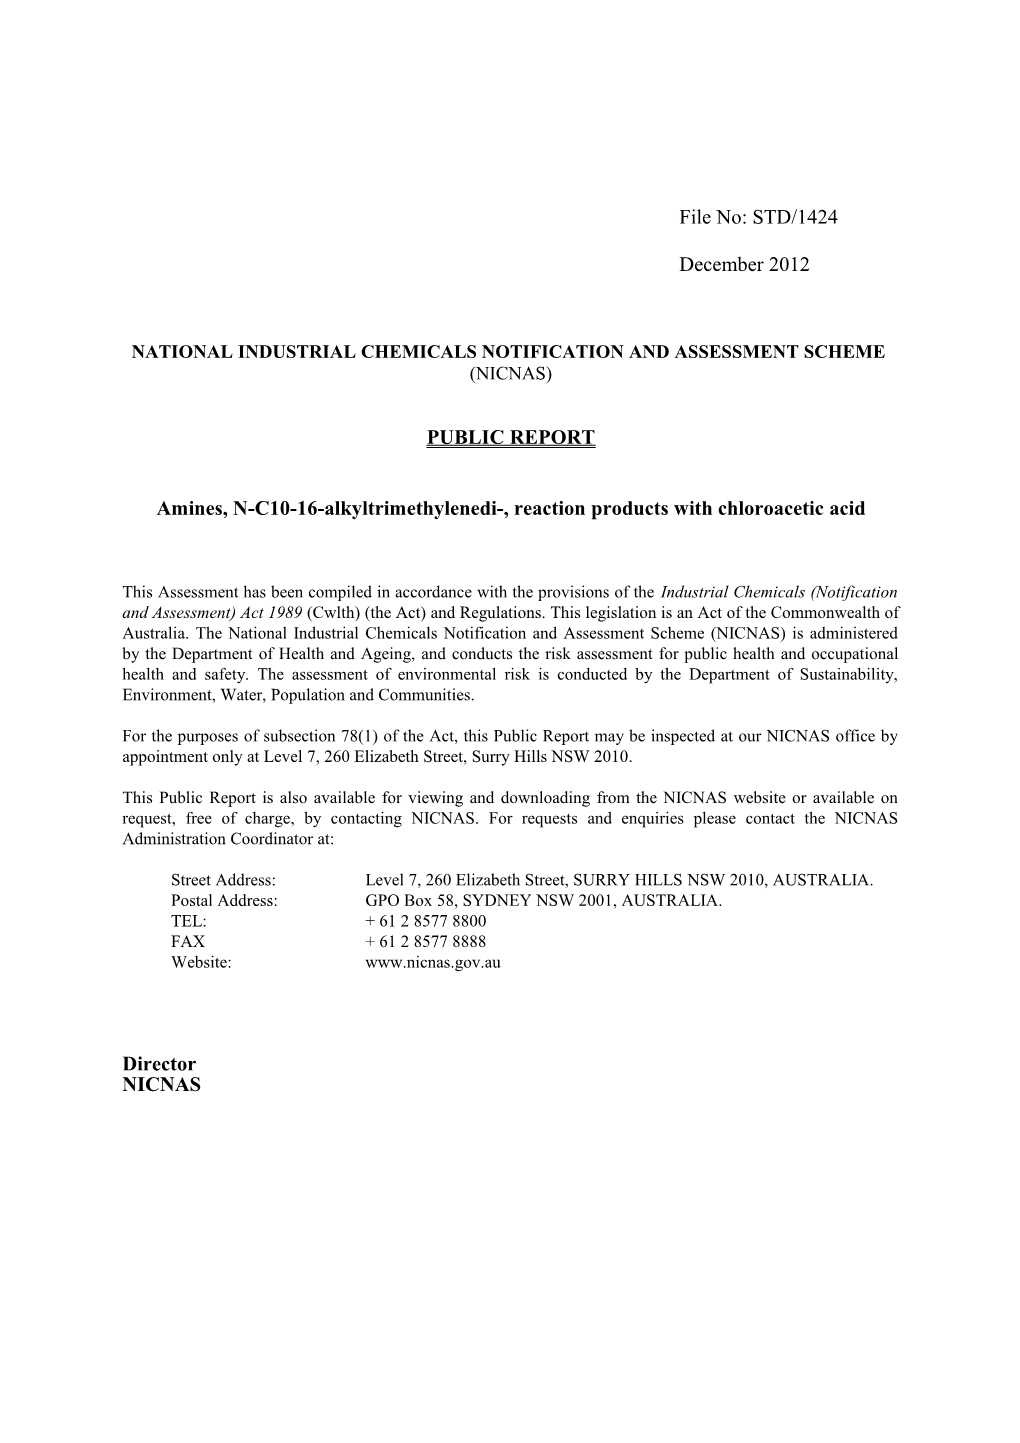 National Industrial Chemicals Notification and Assessment Scheme s64